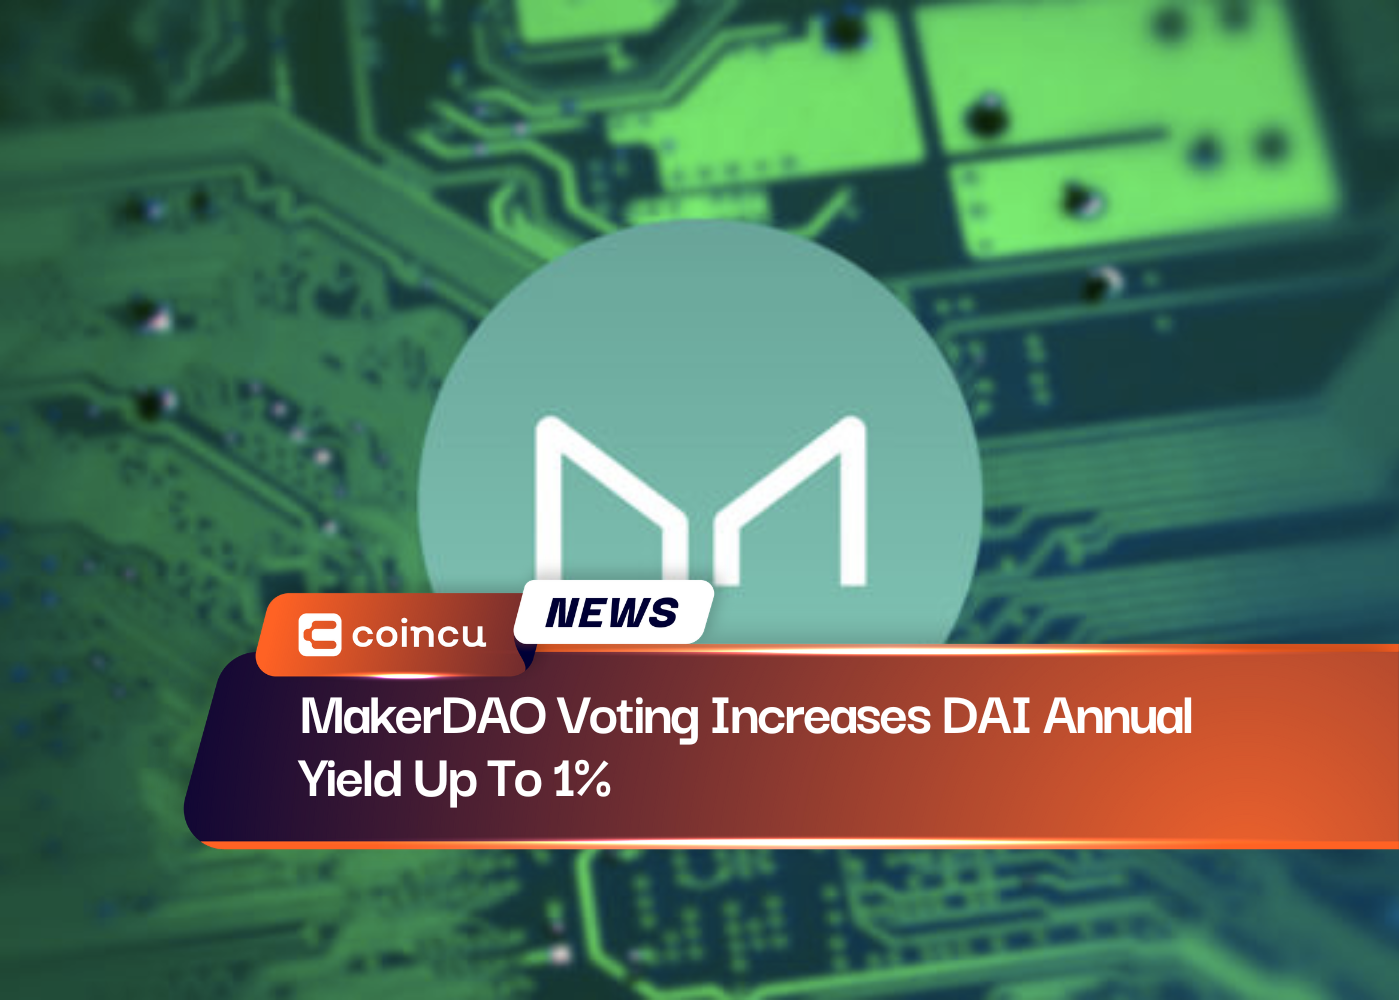 MakerDAO Voting Increases DAI Annual Yield Up To 1%